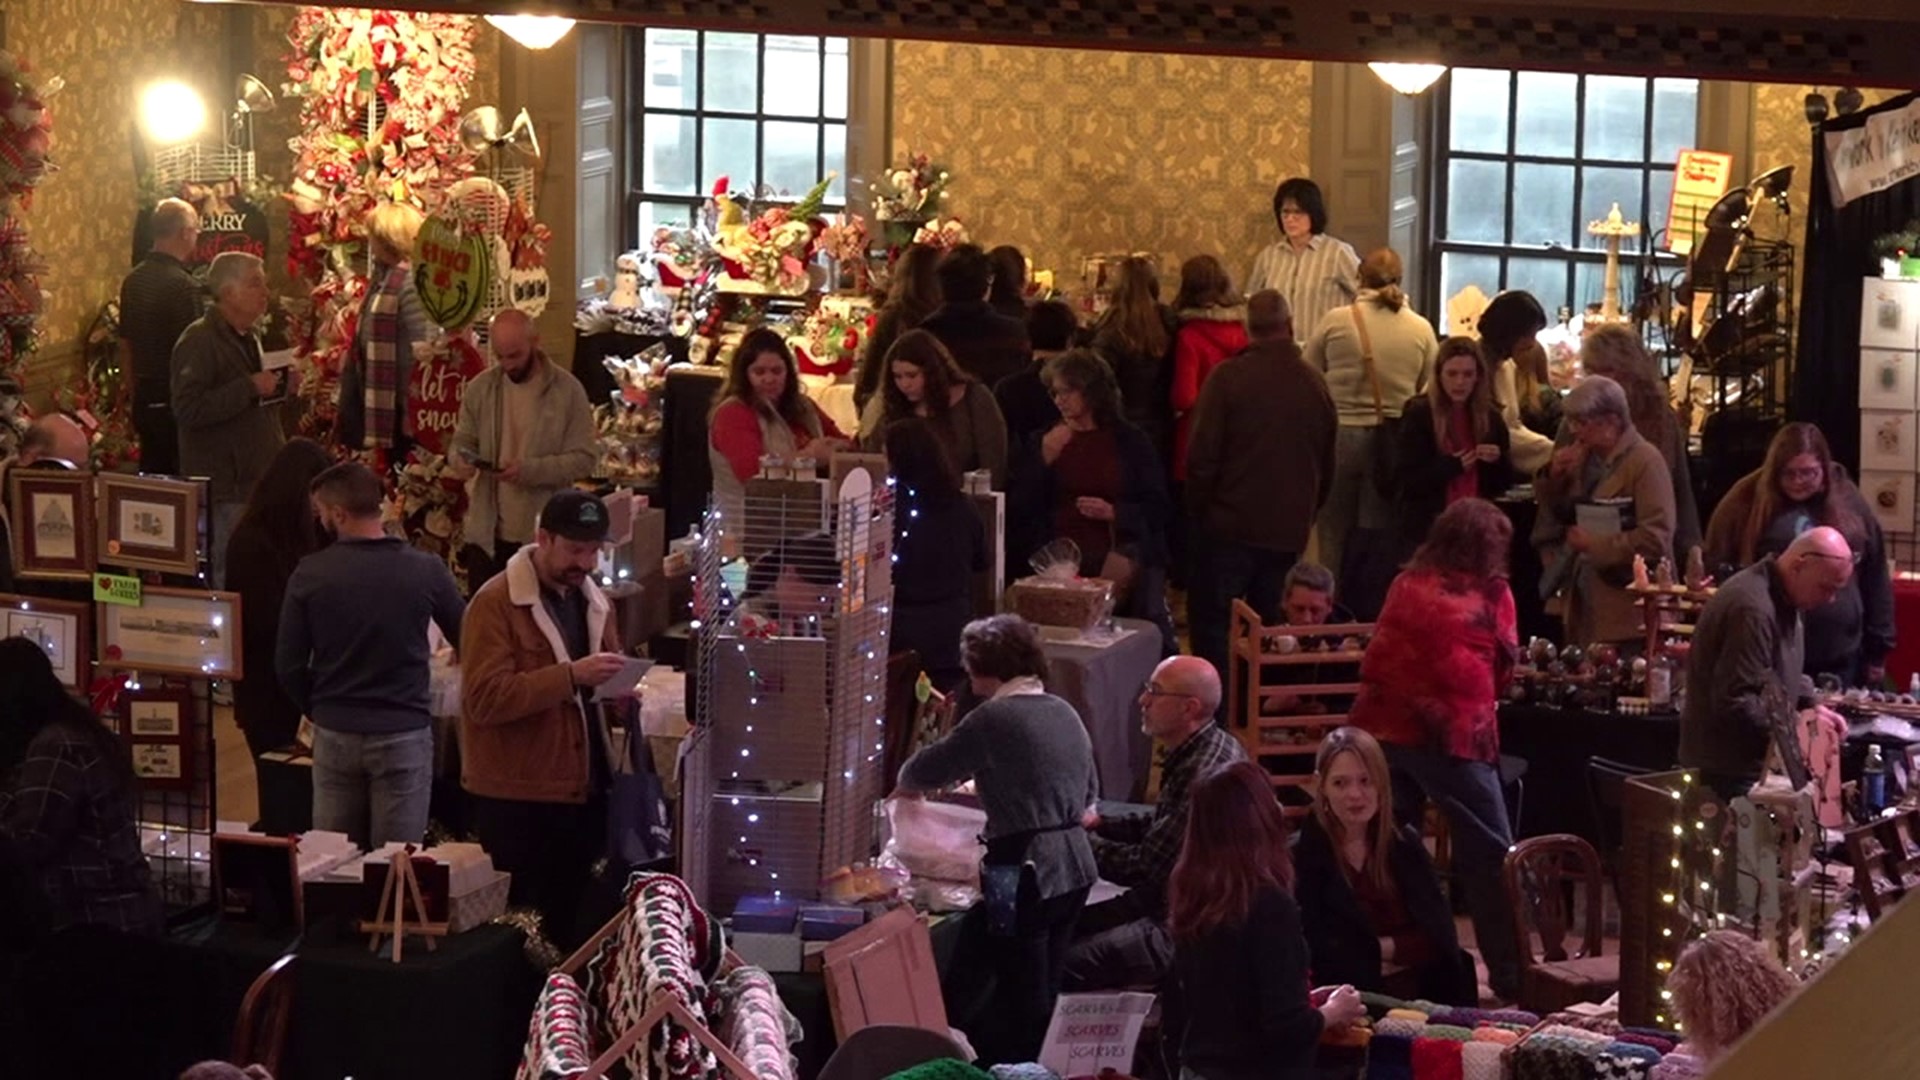 The marketplace was held at the Scranton Cultural Center Sunday afternoon.